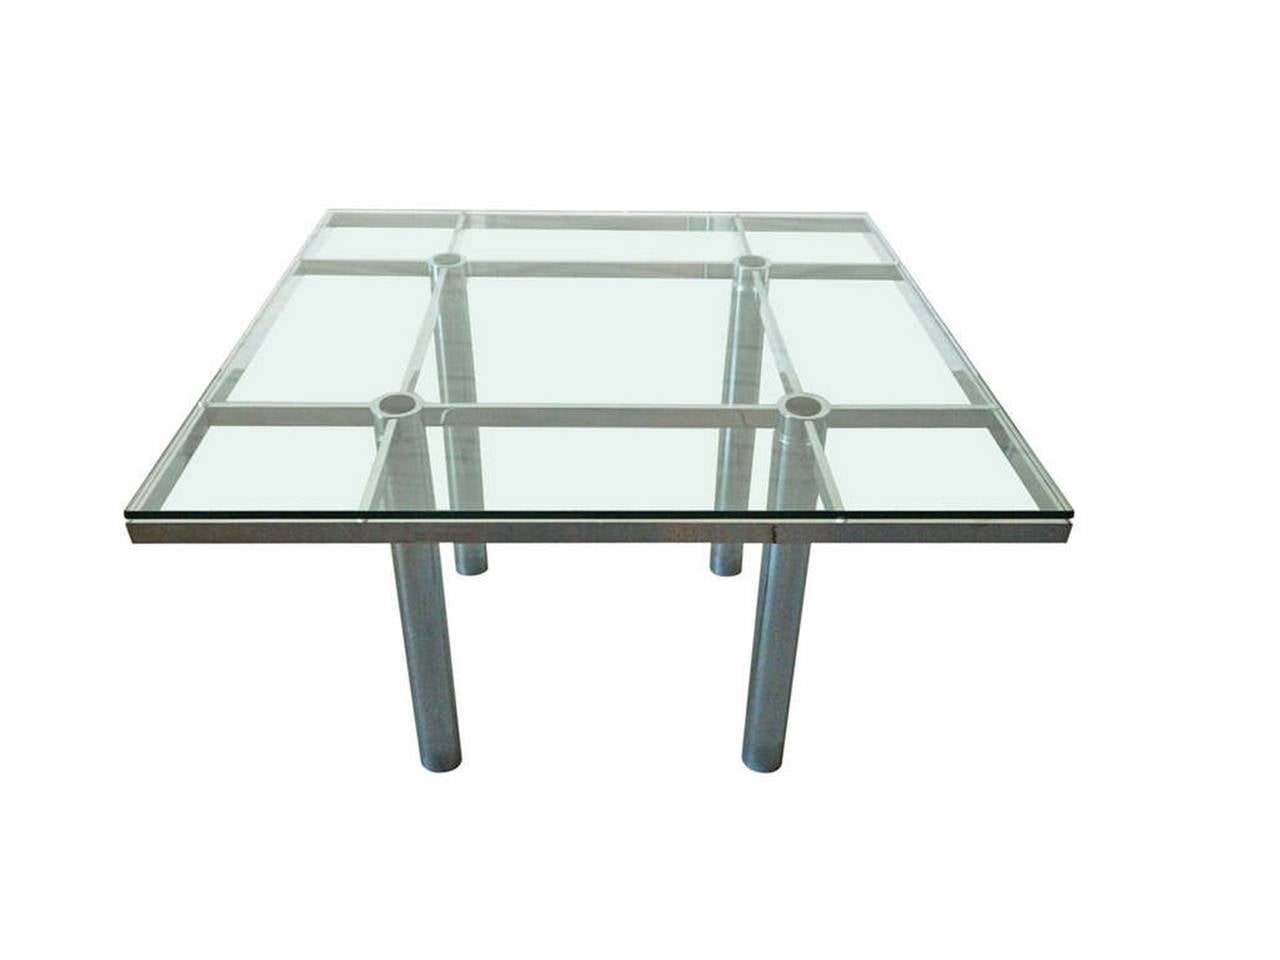 Tobia Scarpa for Gavina chrome and glass top dining or conference table, called the 